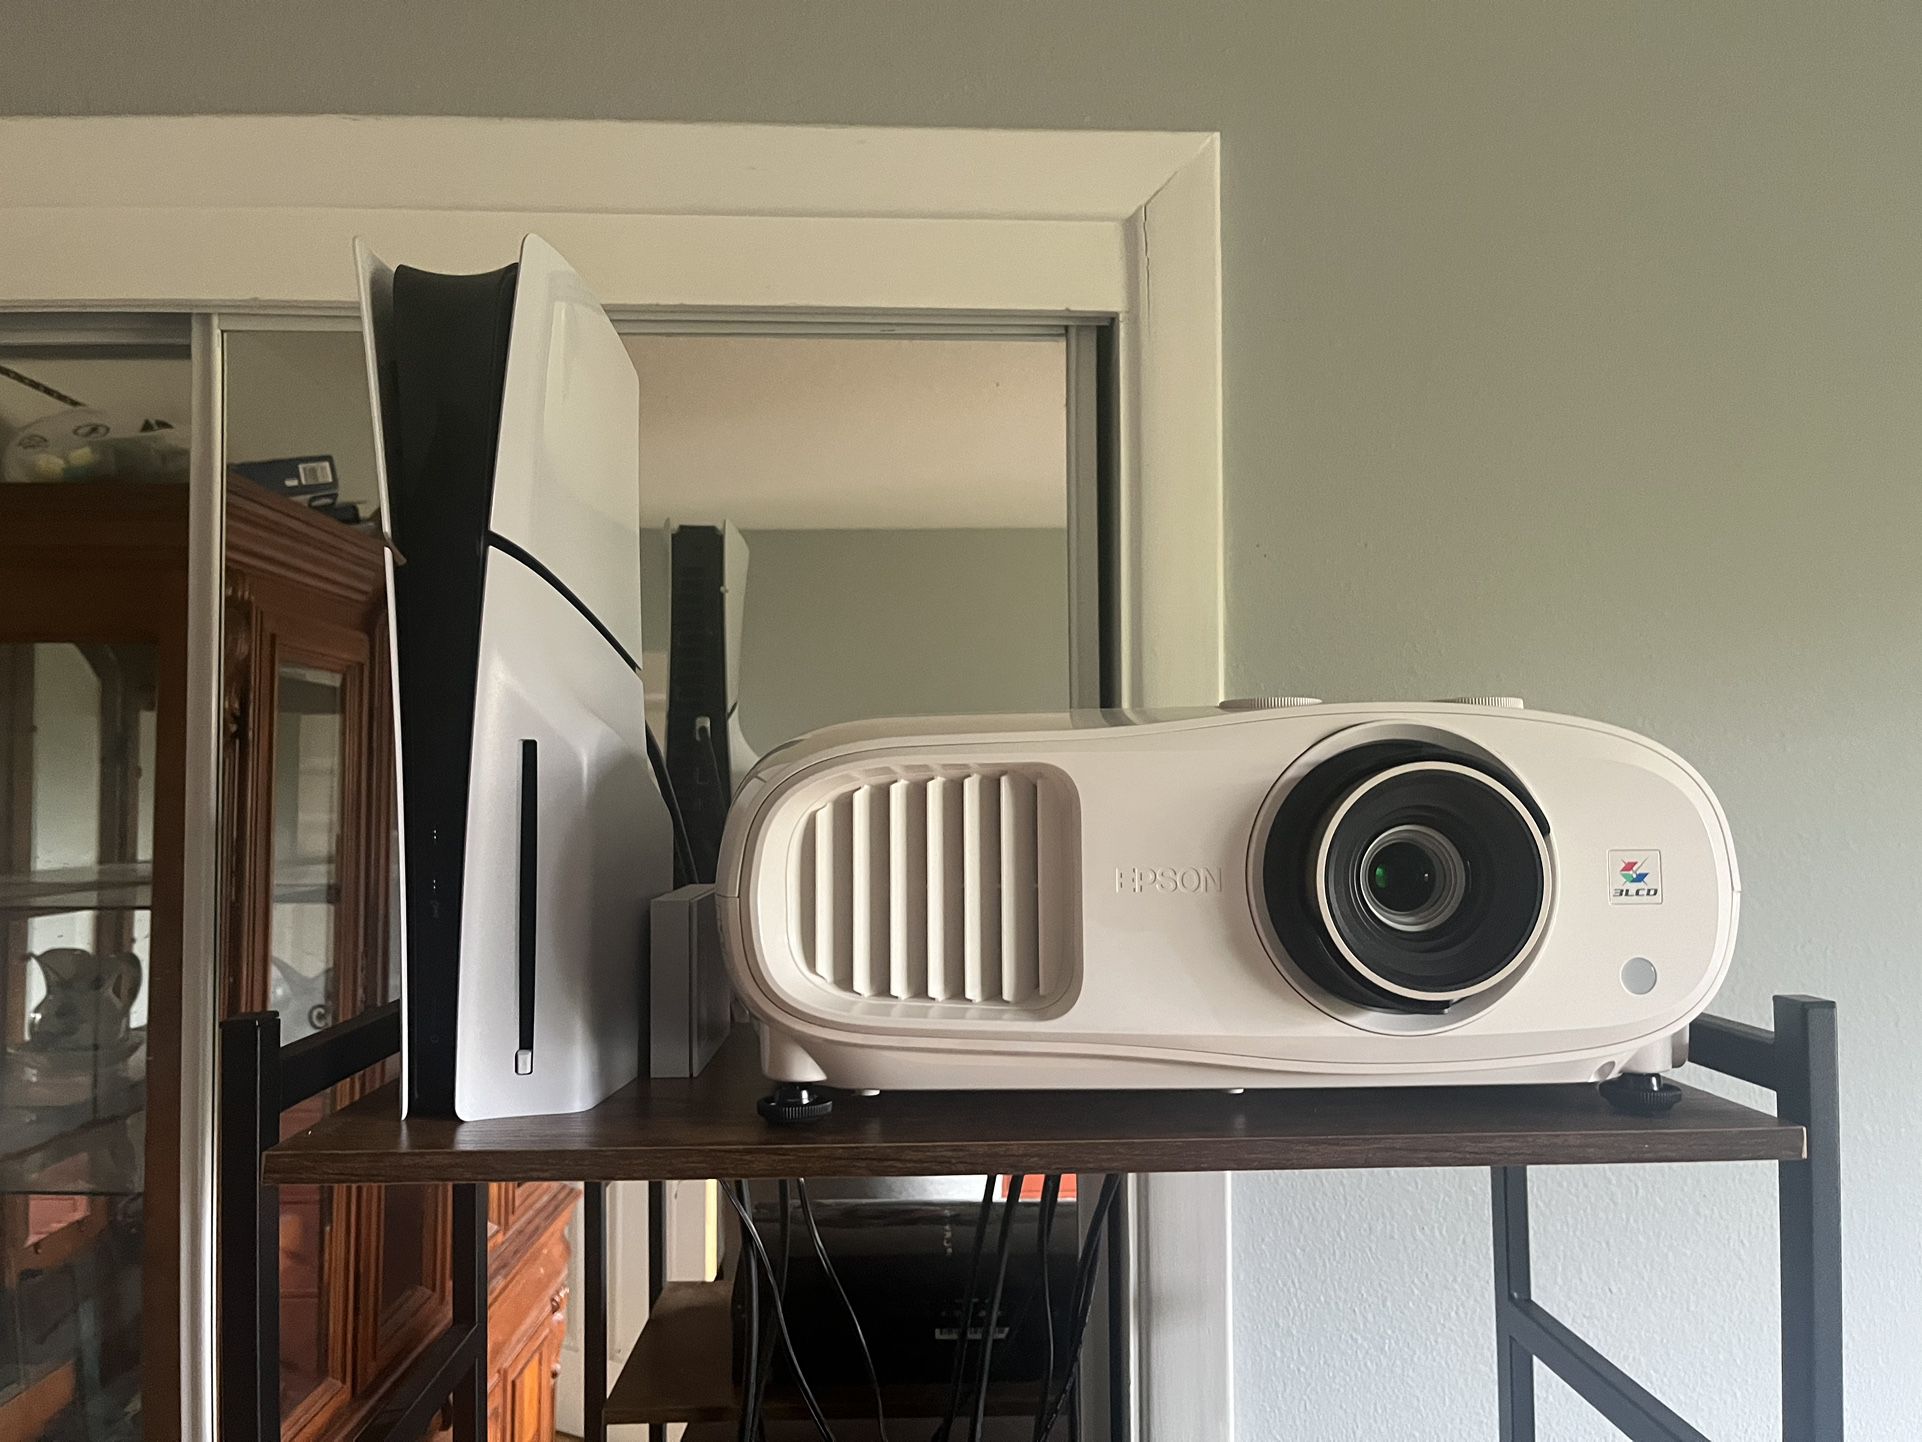 Ps5 And 4k Projector